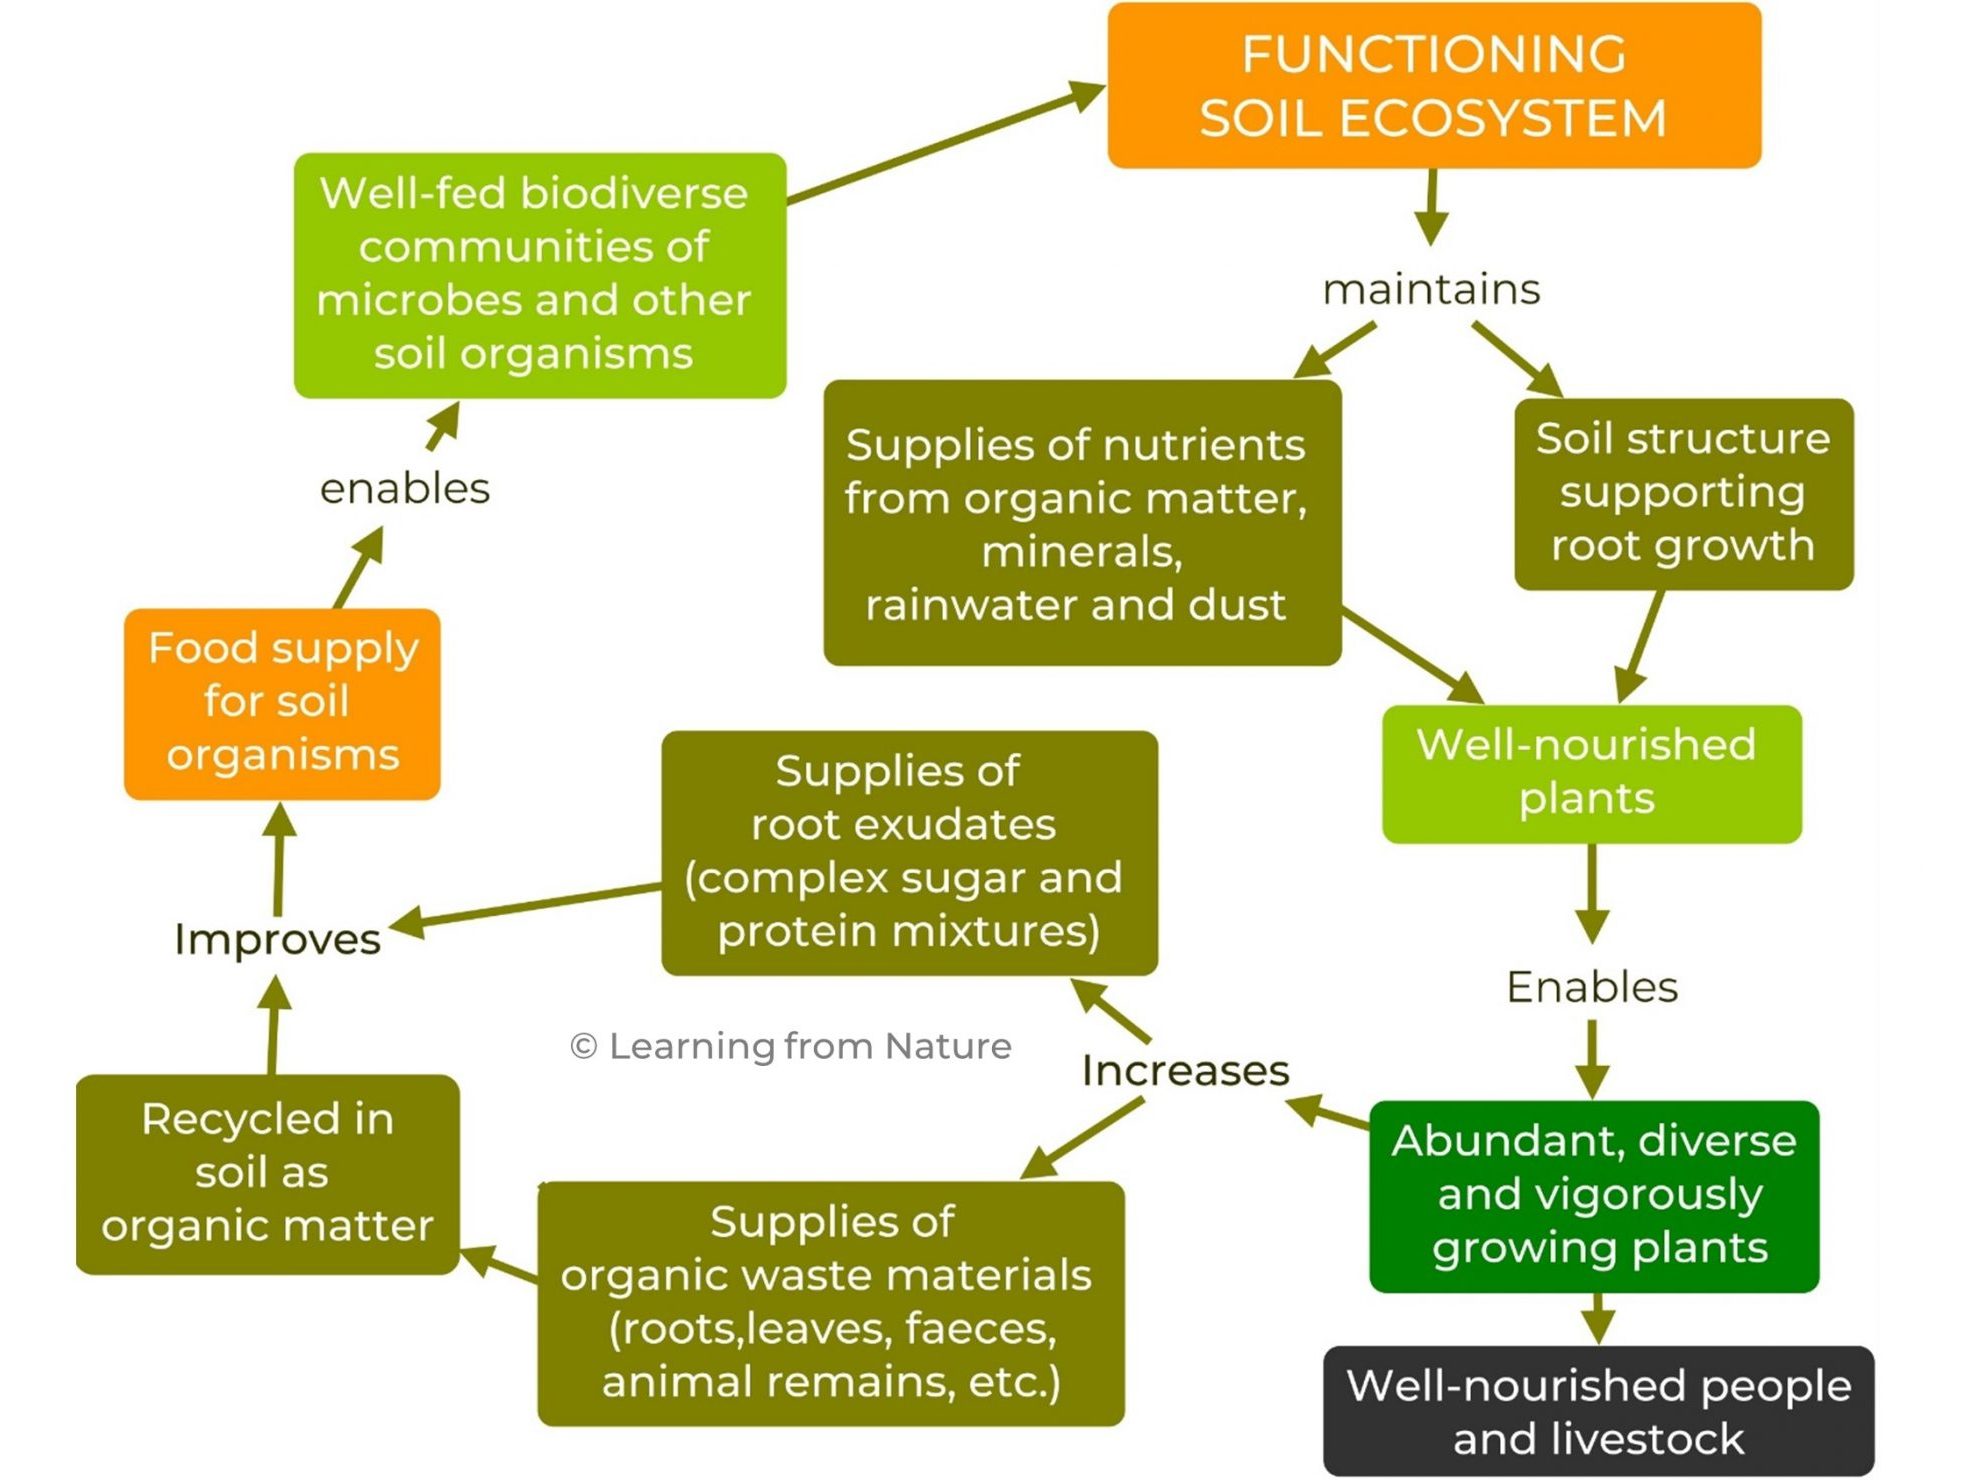 Diagram showing the services provided by functioning soil ecosystems